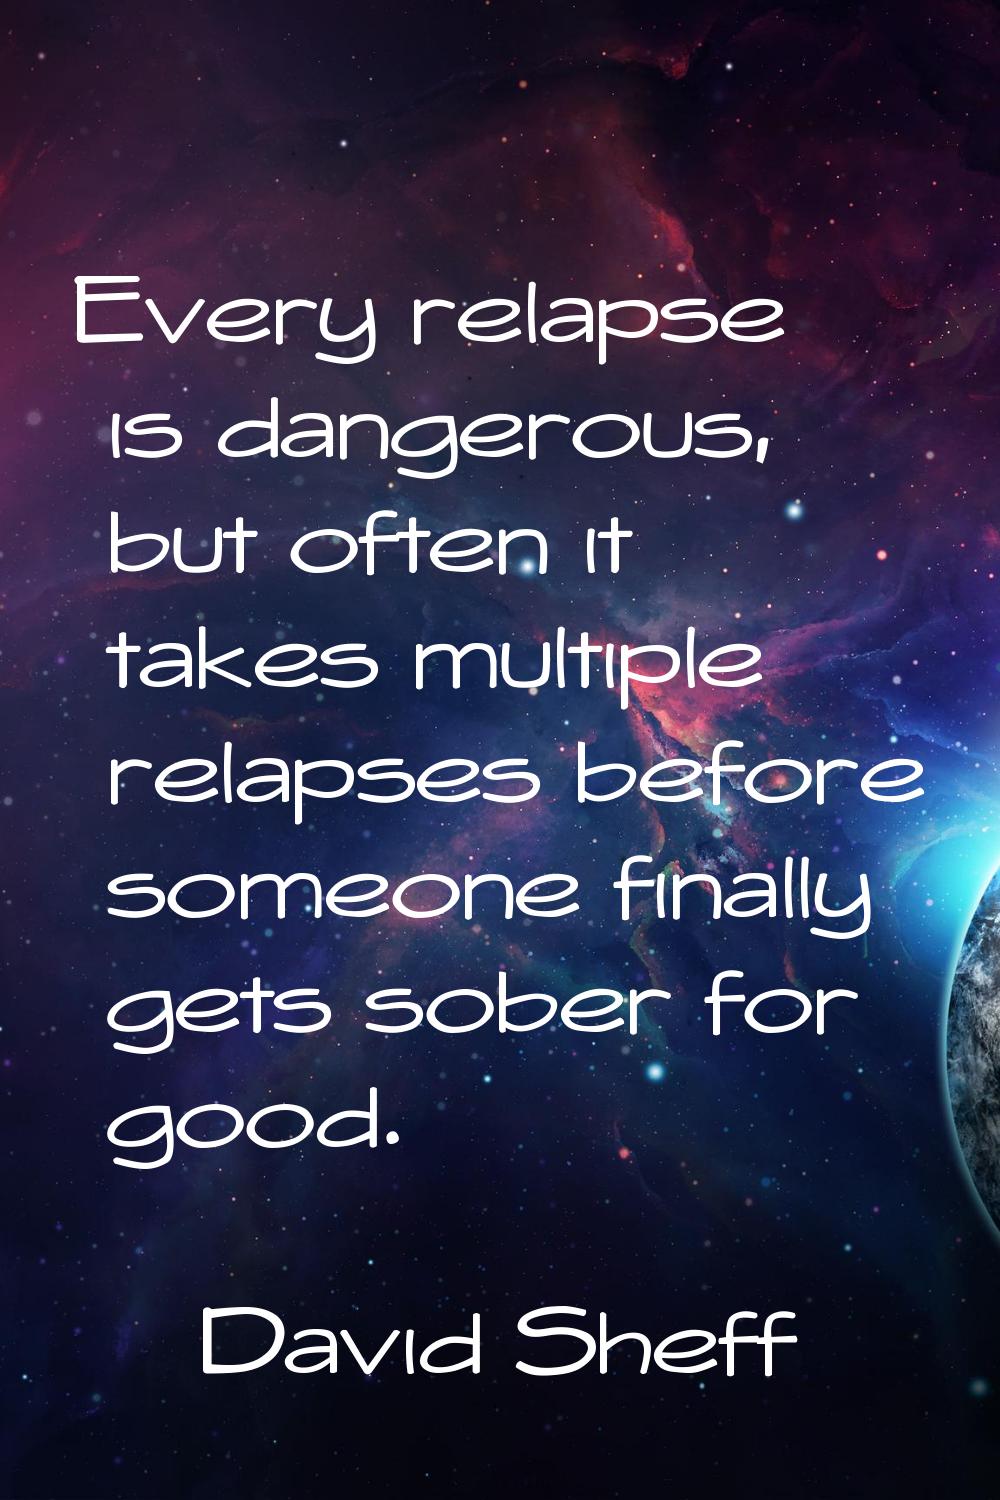 Every relapse is dangerous, but often it takes multiple relapses before someone finally gets sober 